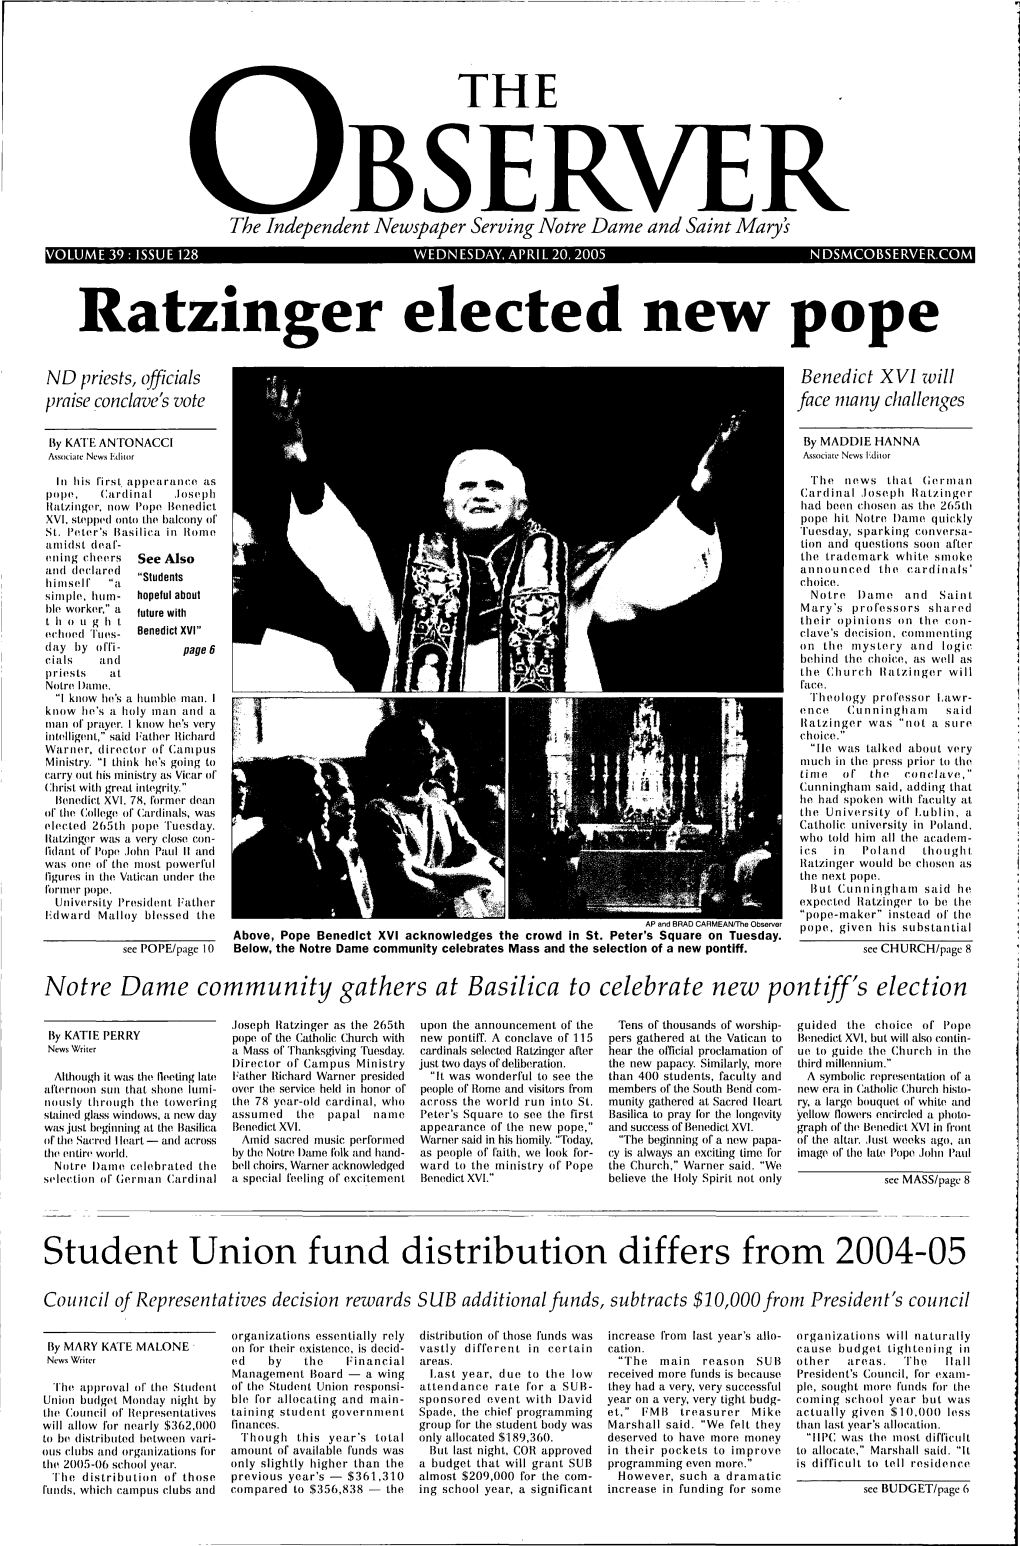 Ratzinger Elected New Pope